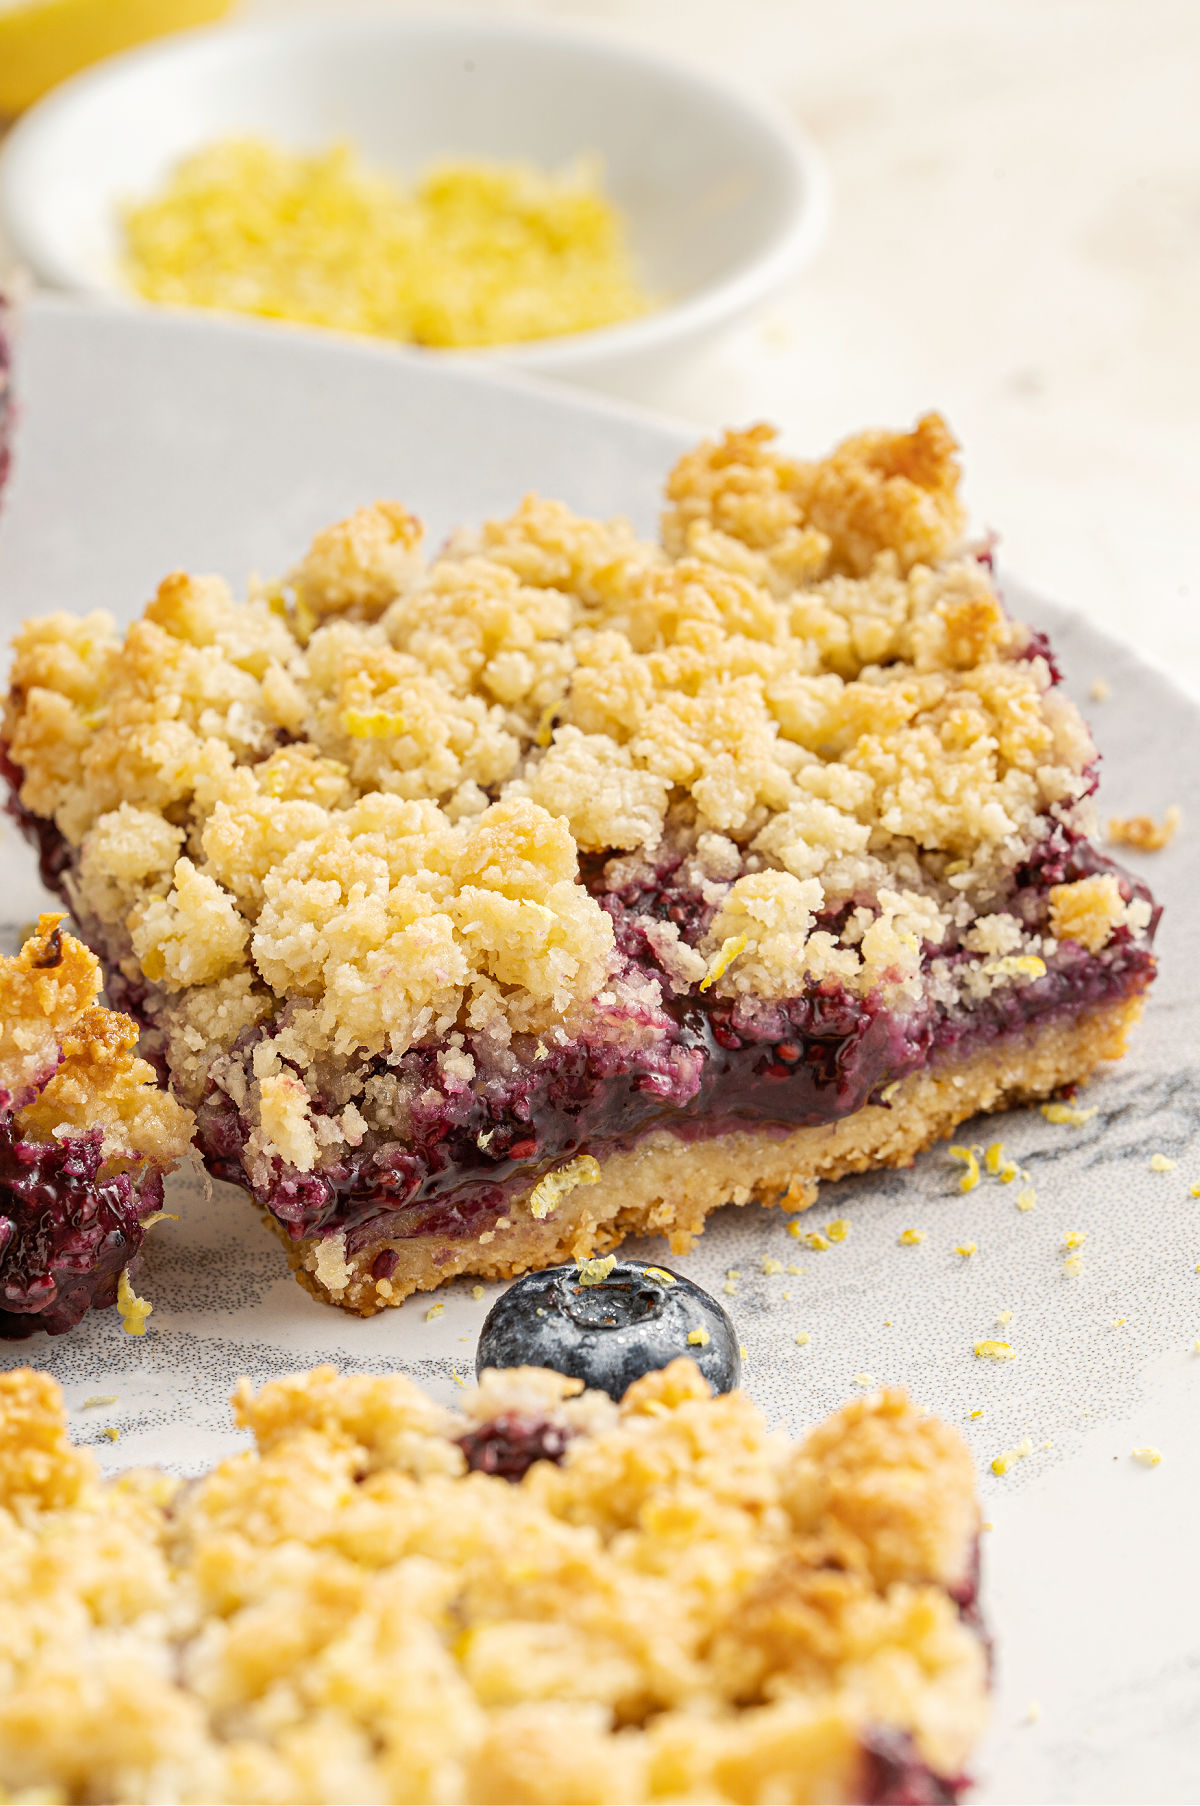 Slice of berry crumble bar.